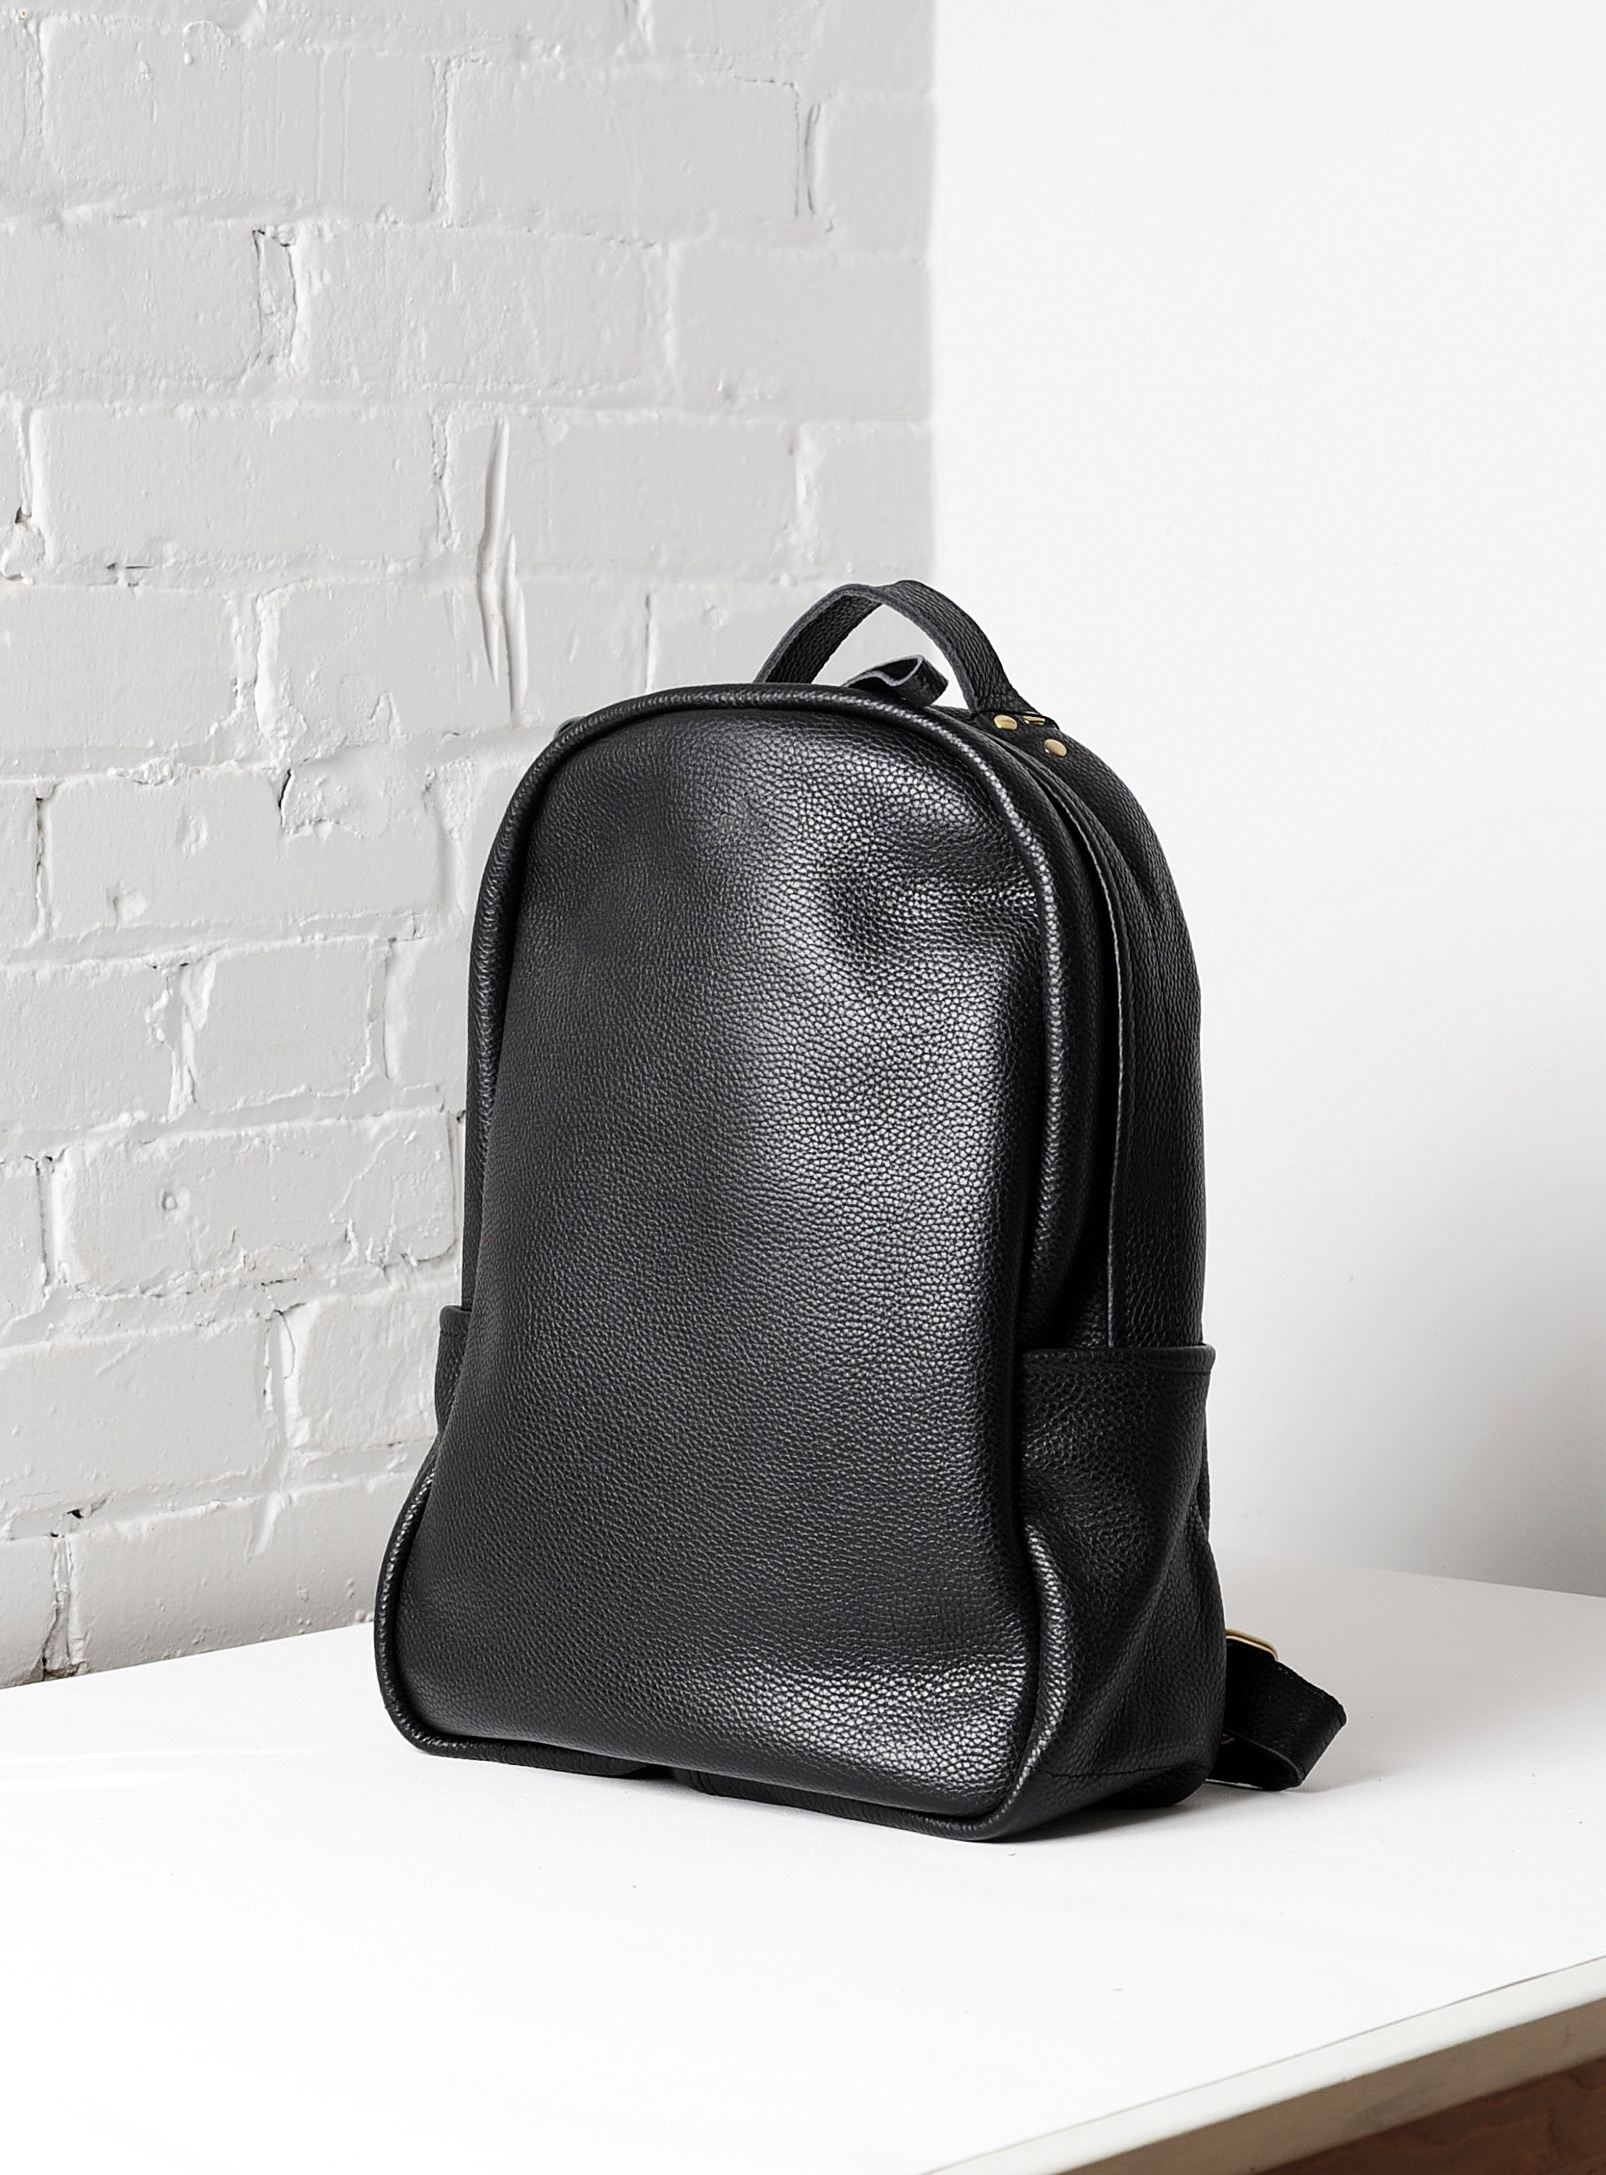 Uppdoo - Dome laptop backpack